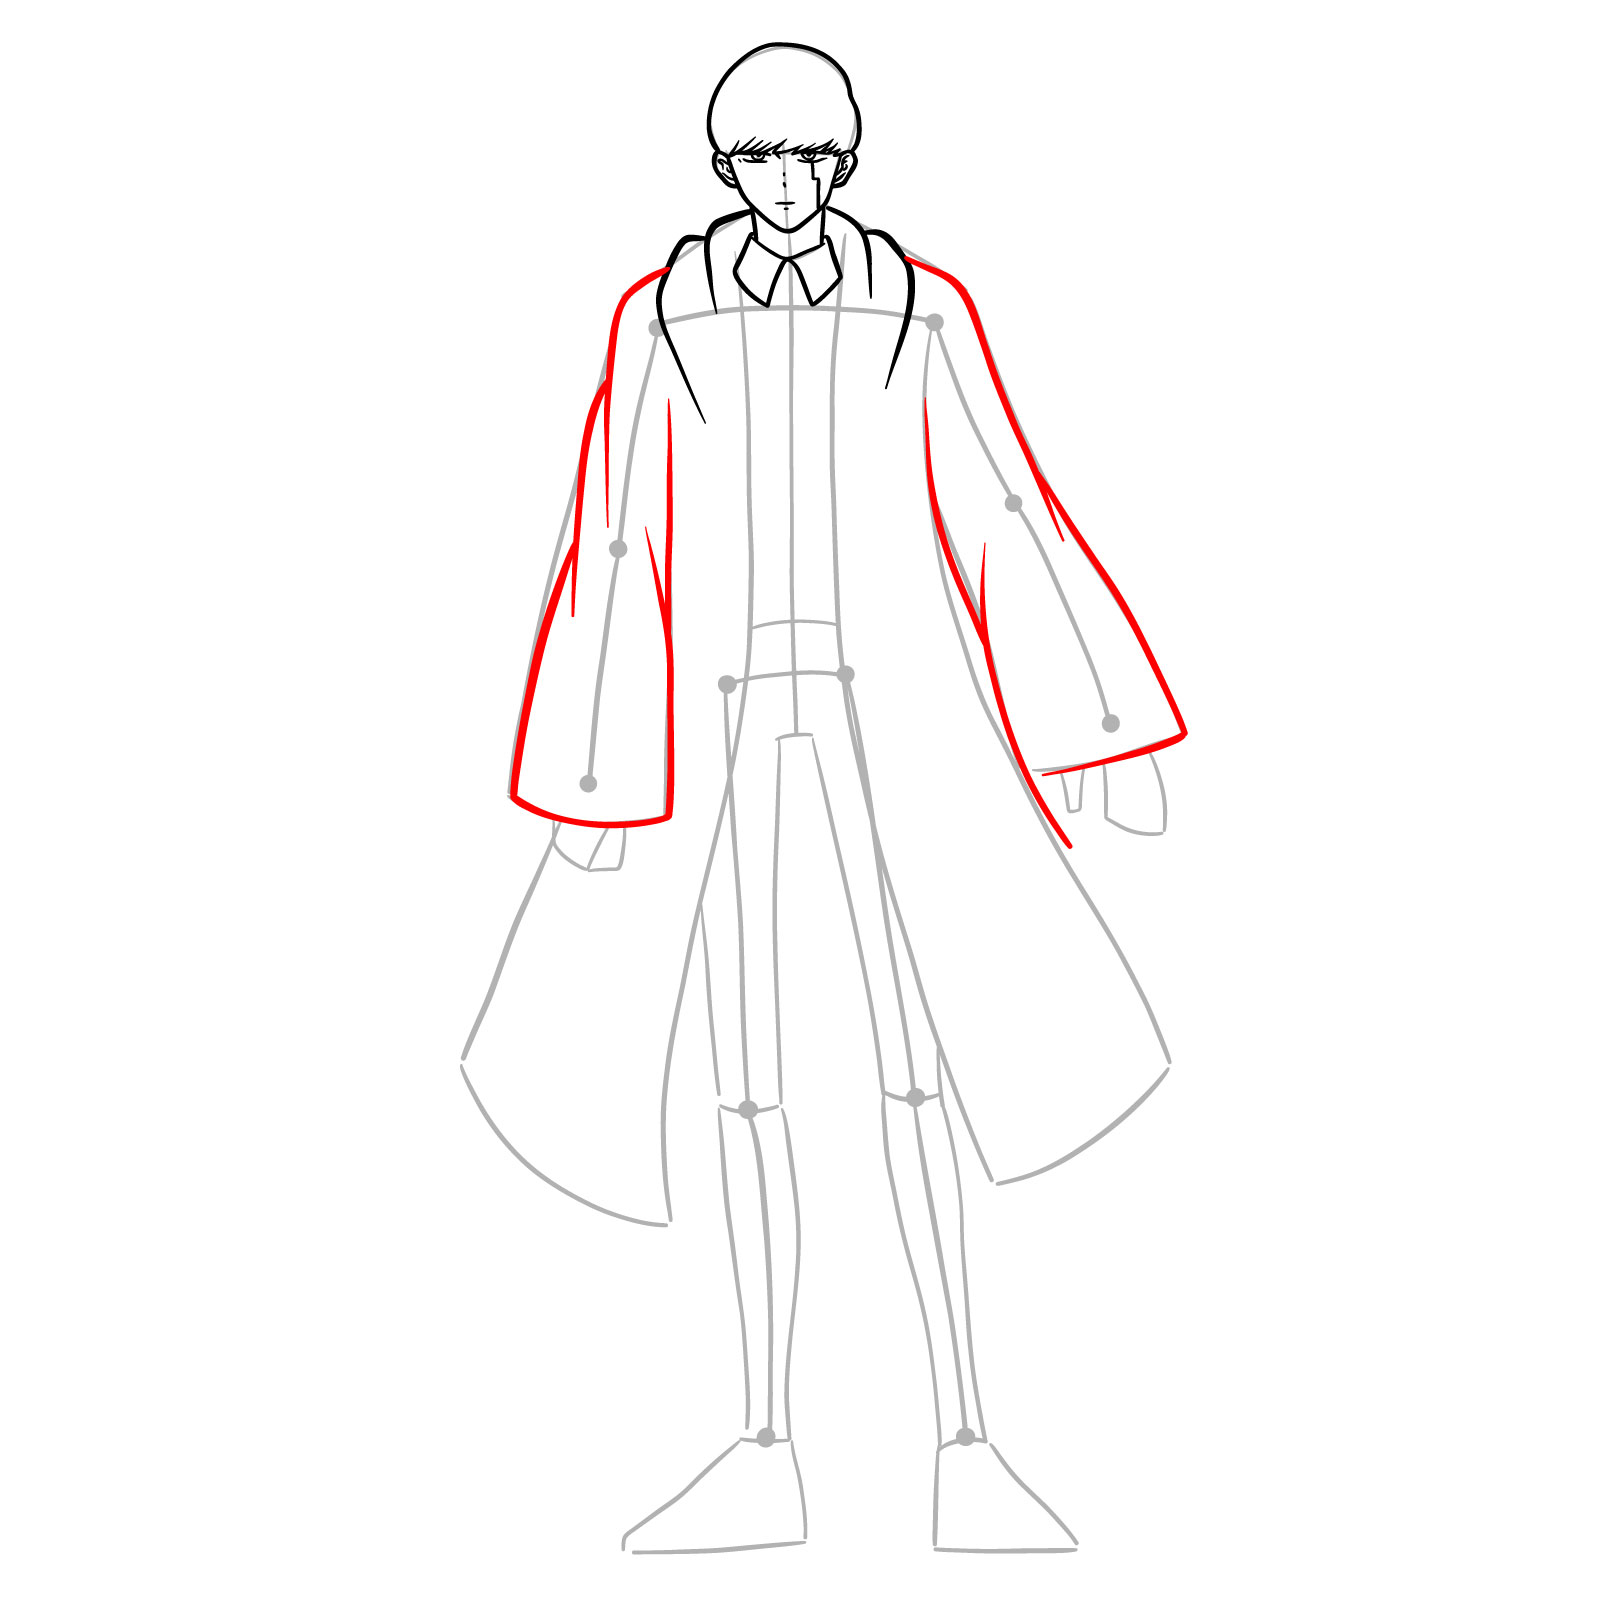 Step-by-step guide on drawing the sleeves of Mash's cloak in a full body sketch - step 10